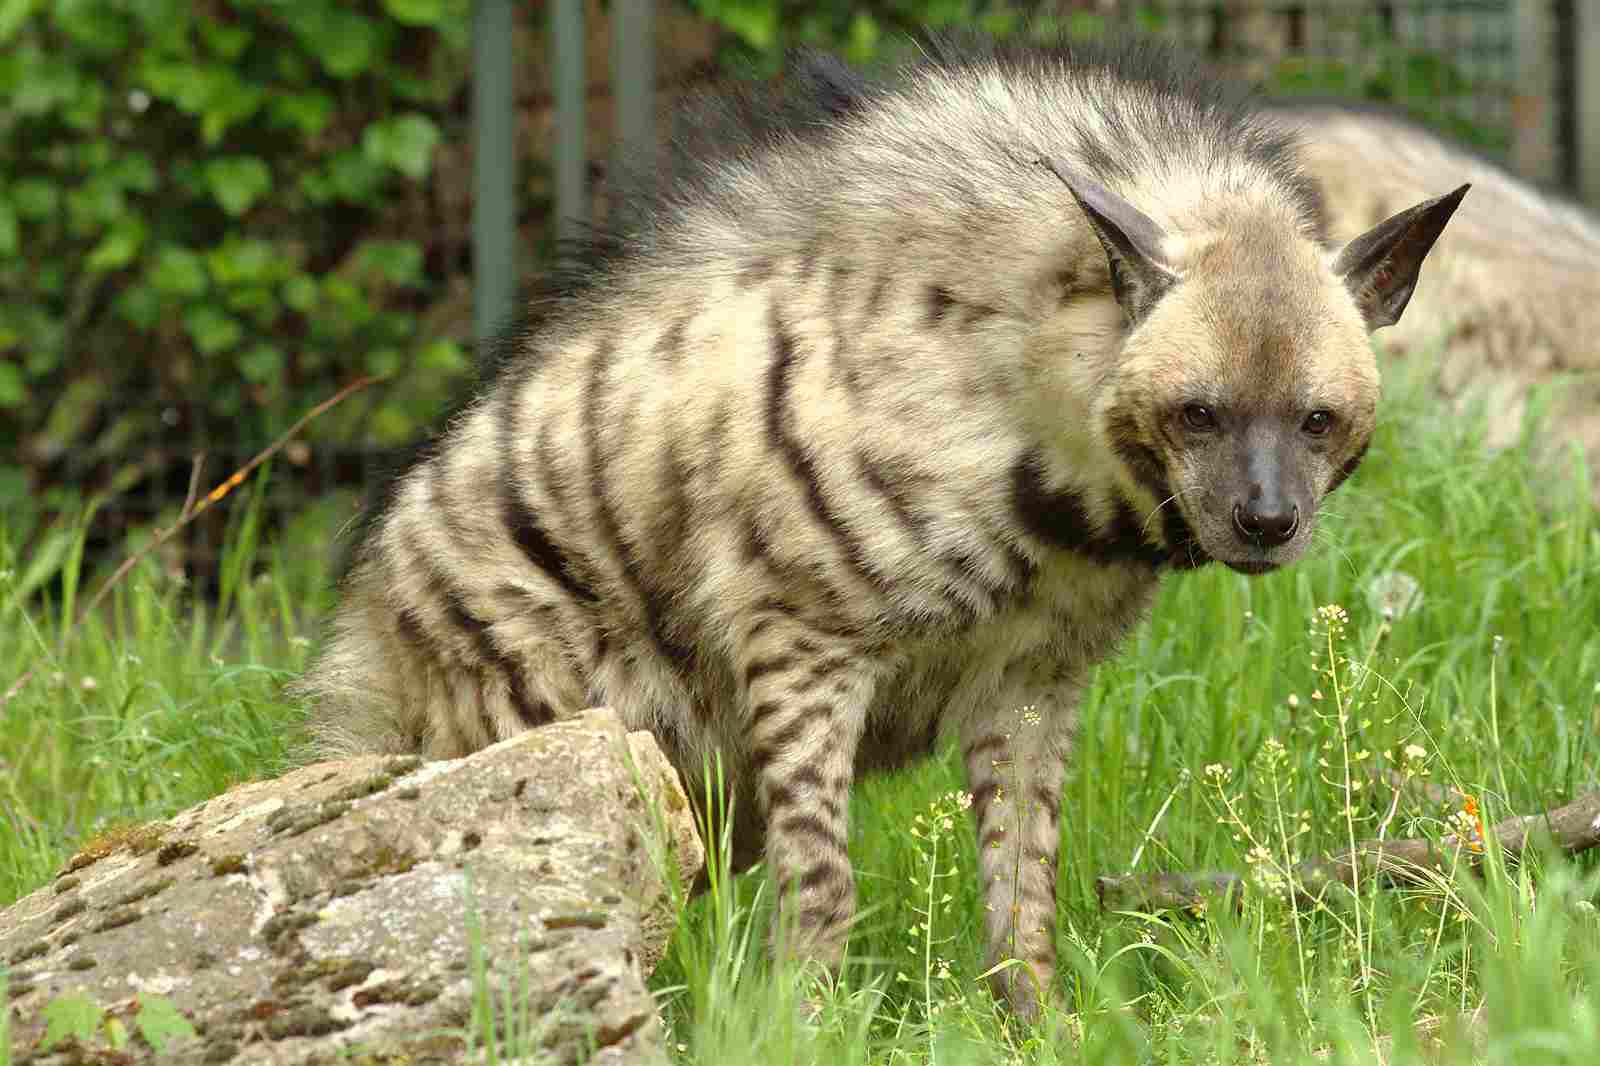 Striped Hyena Vs Spotted Hyena: the Striped Hyena is More Solitary Than its Spotted Counterpart (Credit: zoofanatic 2014 .CC BY 2.0.)